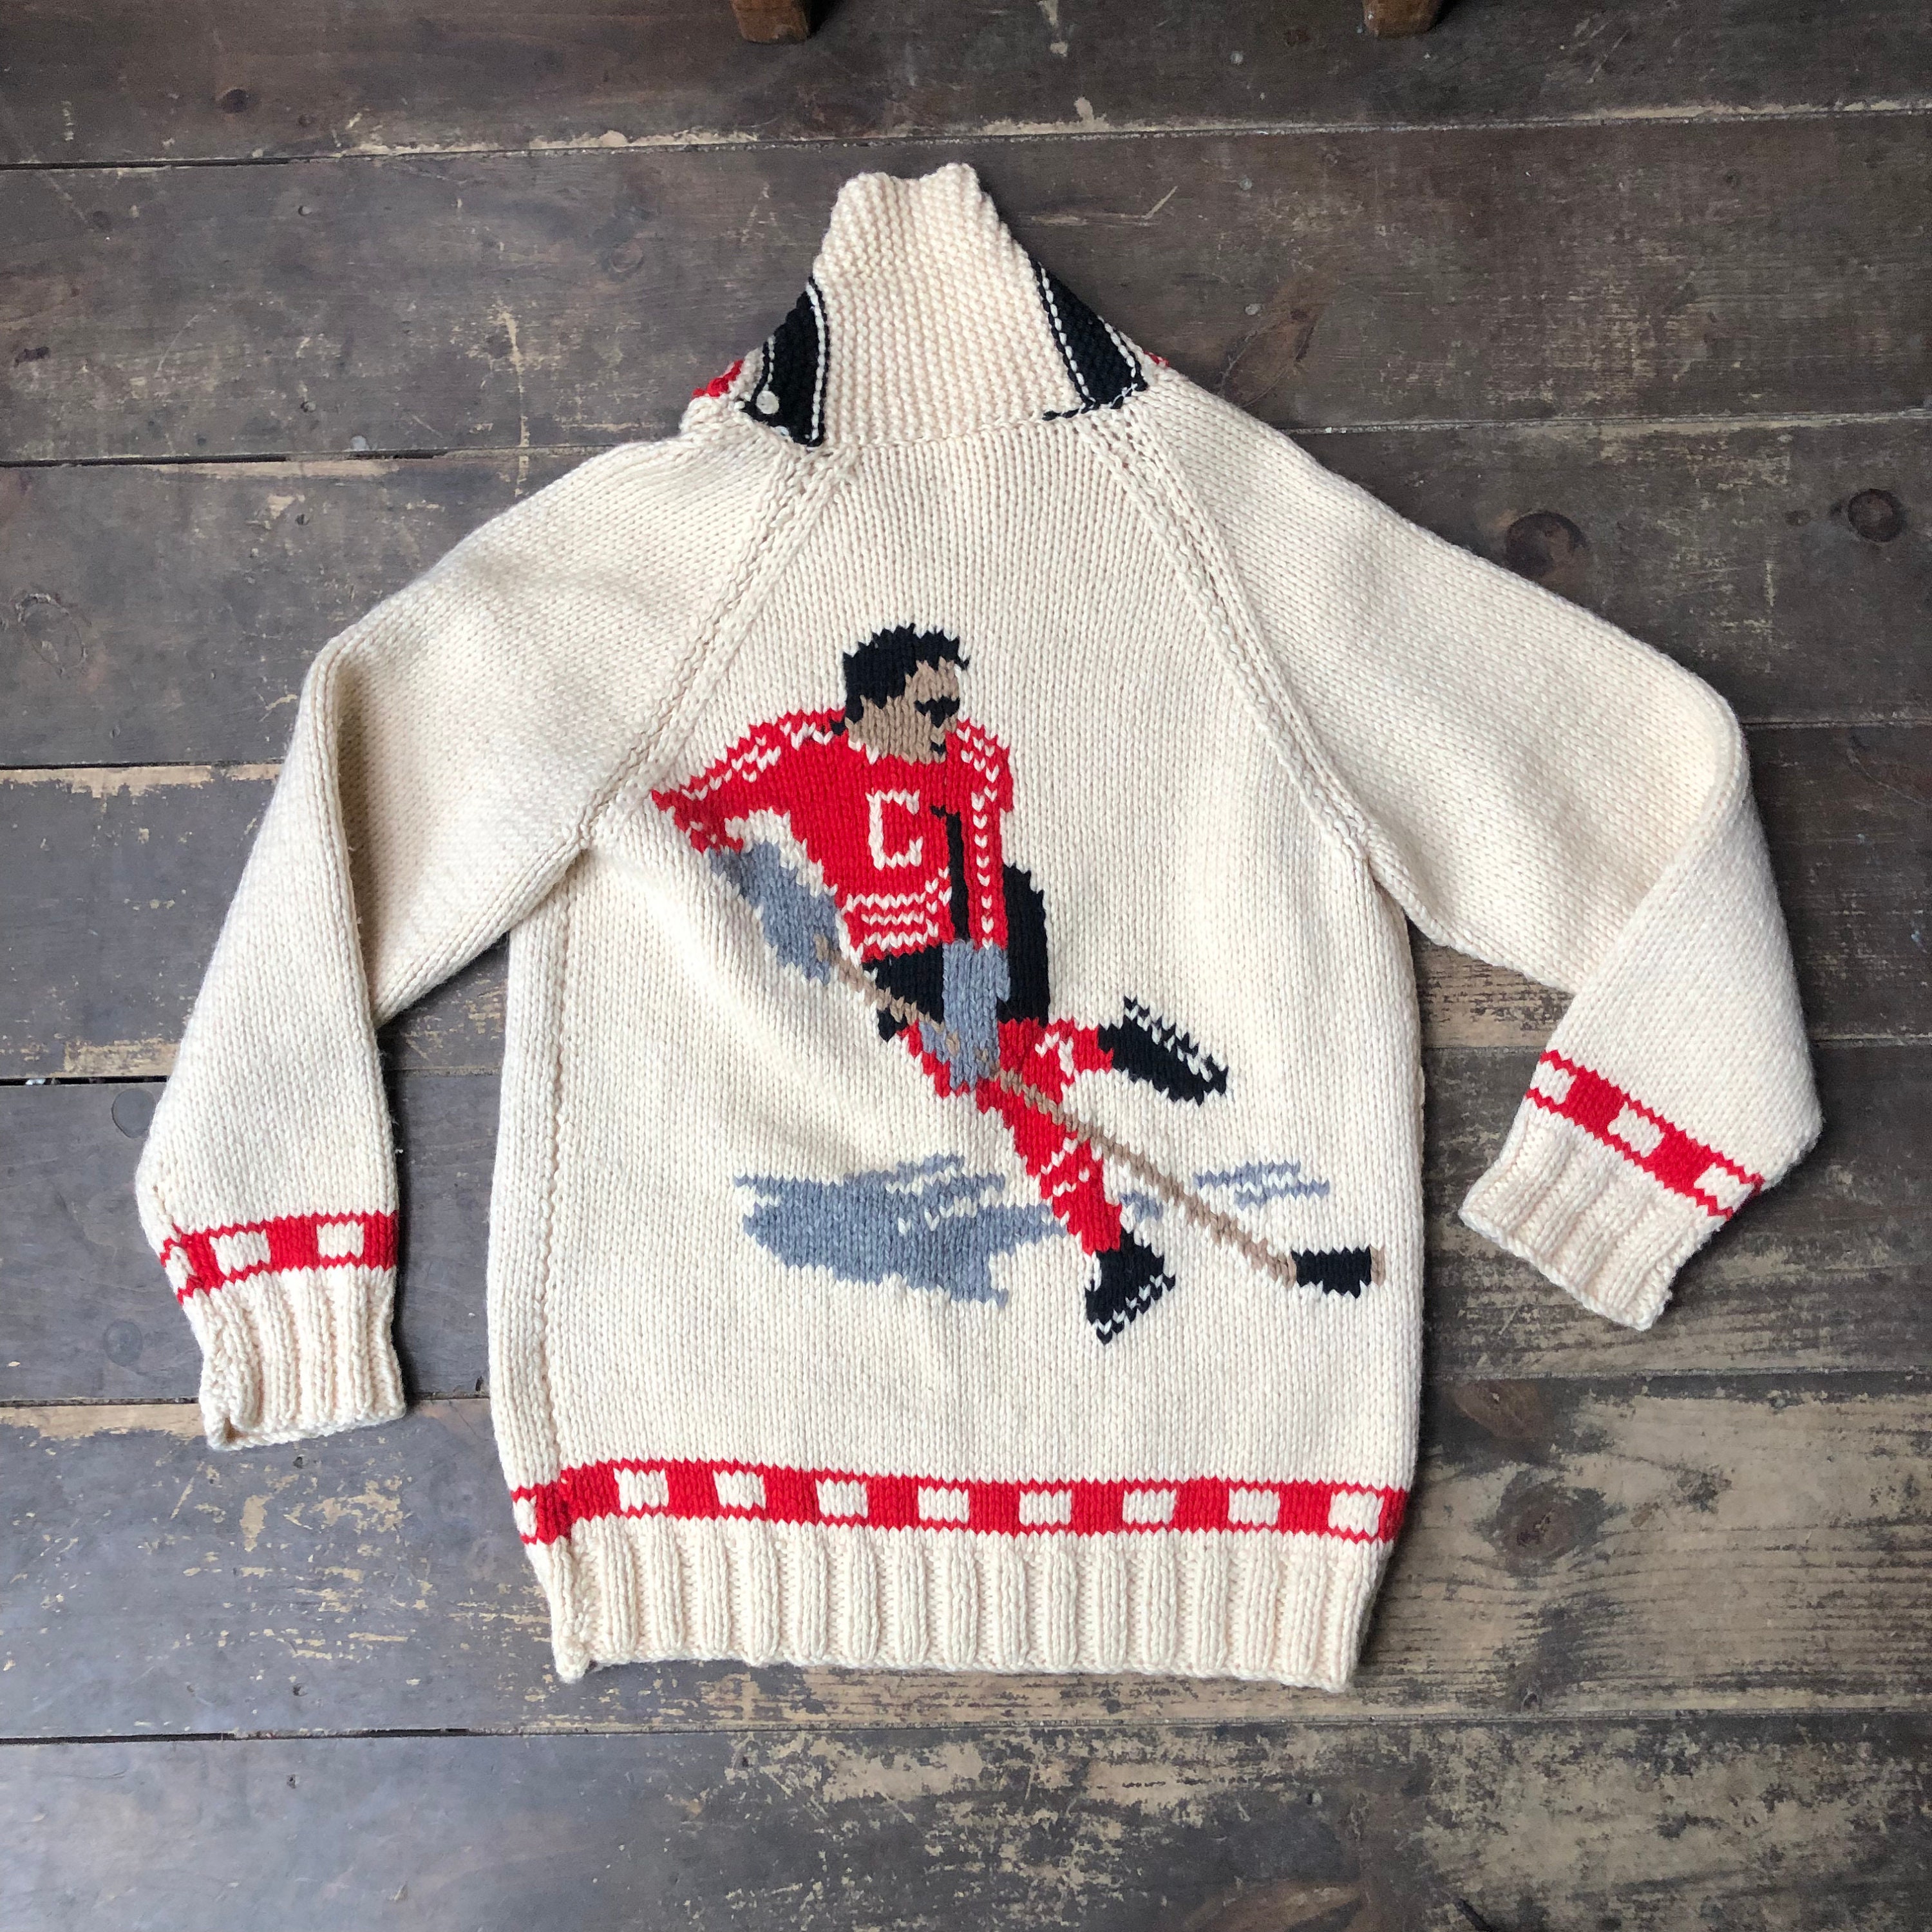 NHL - Sweaters, Knitted sweaters